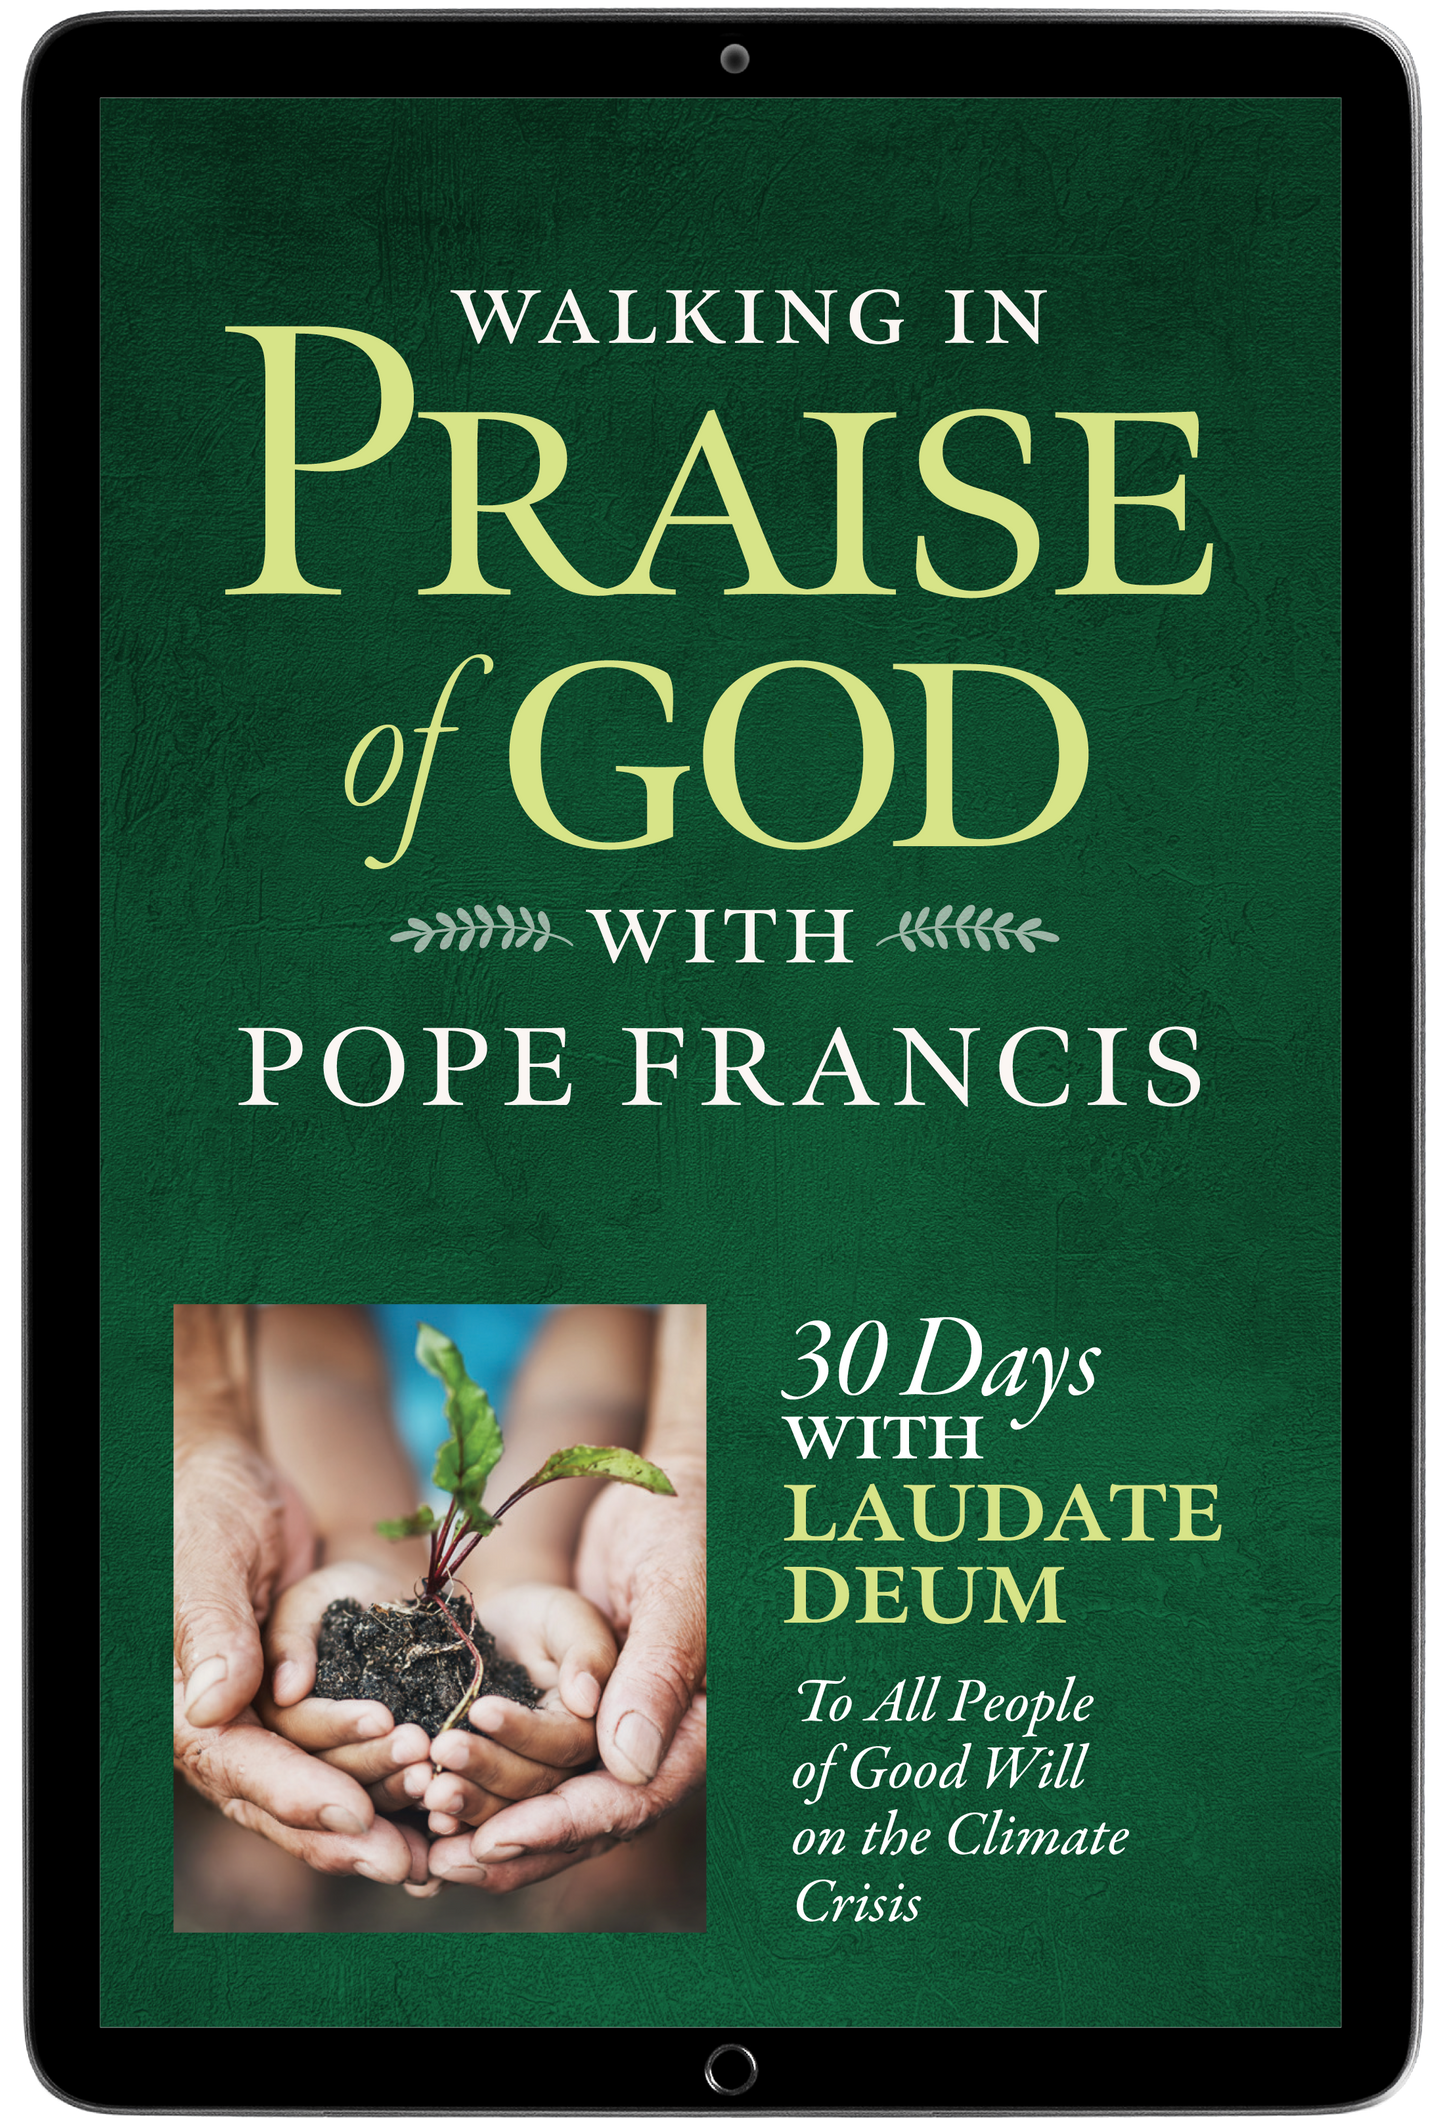 Walking in Praise of God with Pope Francis